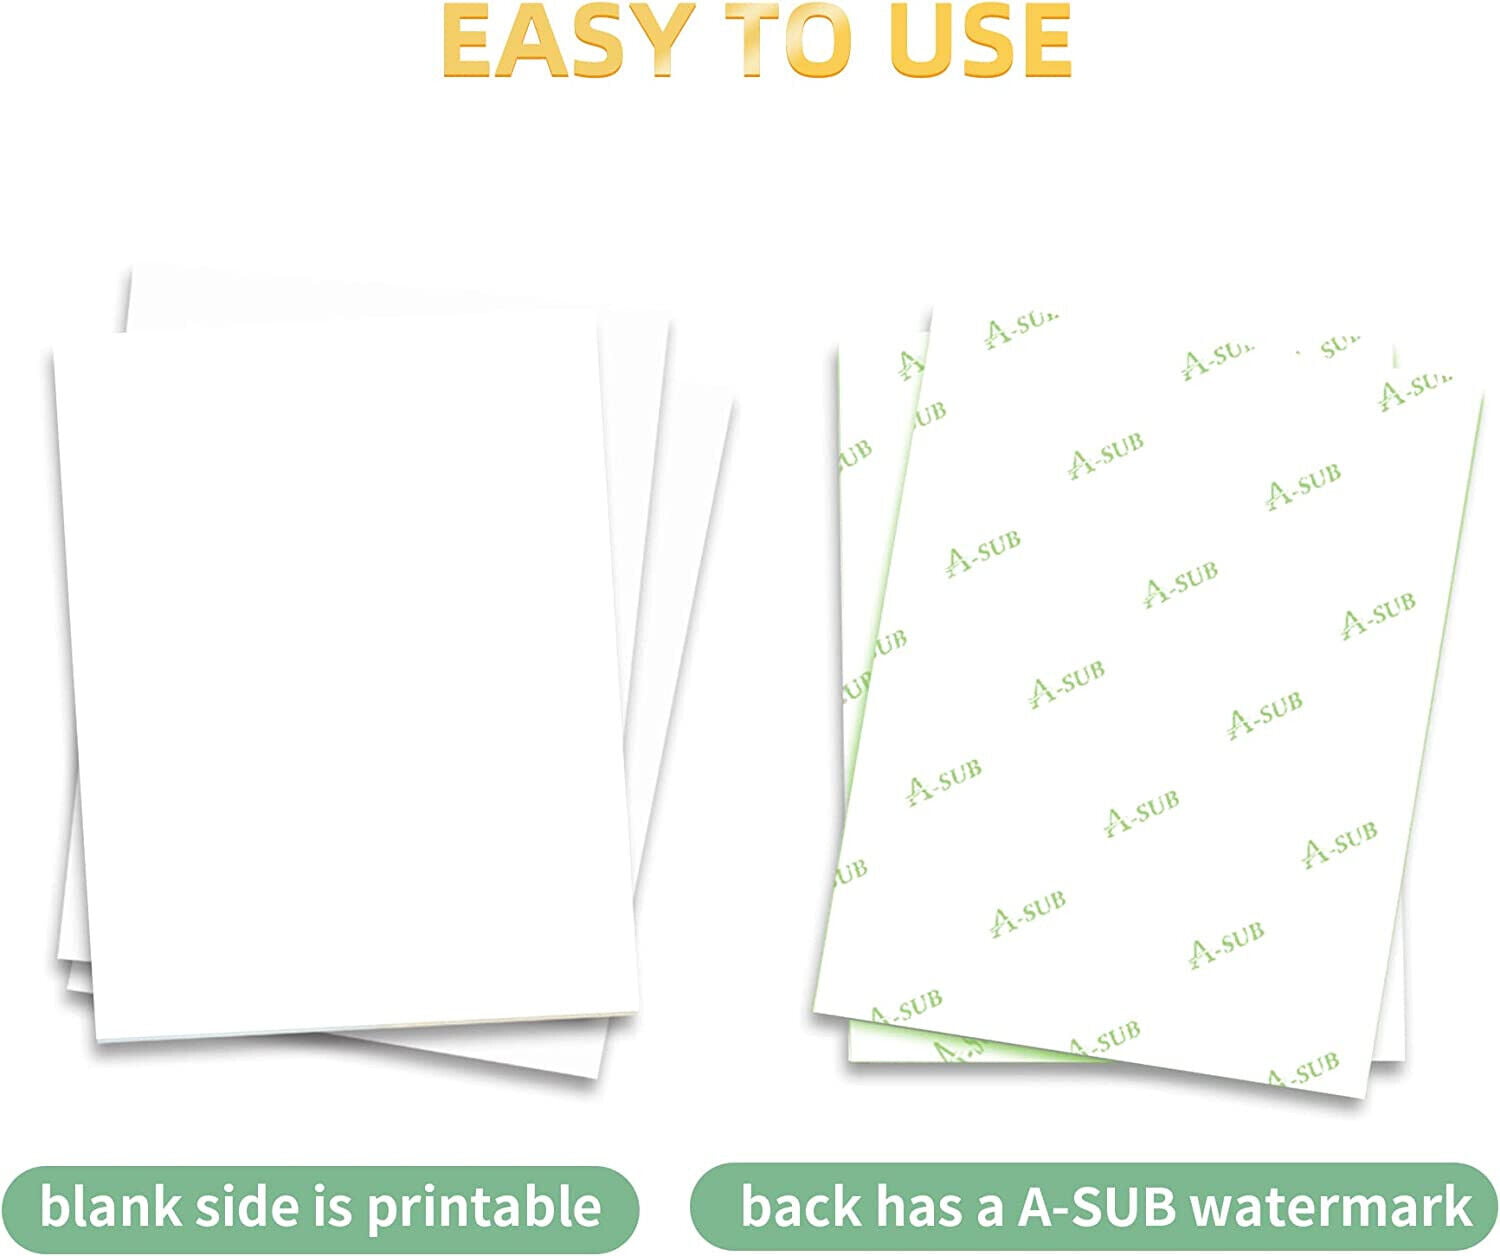 A-SUB丨No.1 sublimation paper in North American (@asub_paper) • Instagram  फोटोहरू र भिडियोहरू